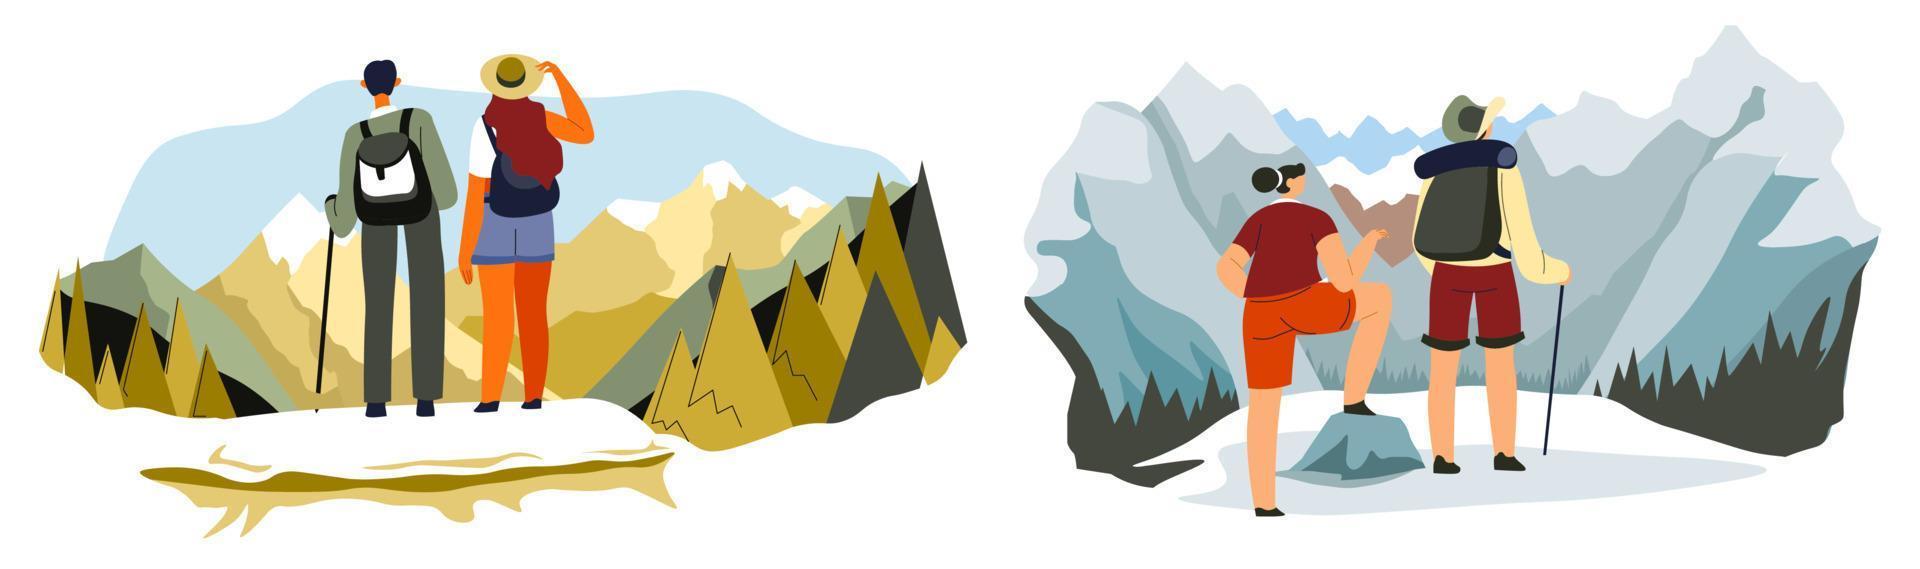 People traveling and hiking in mountains vector